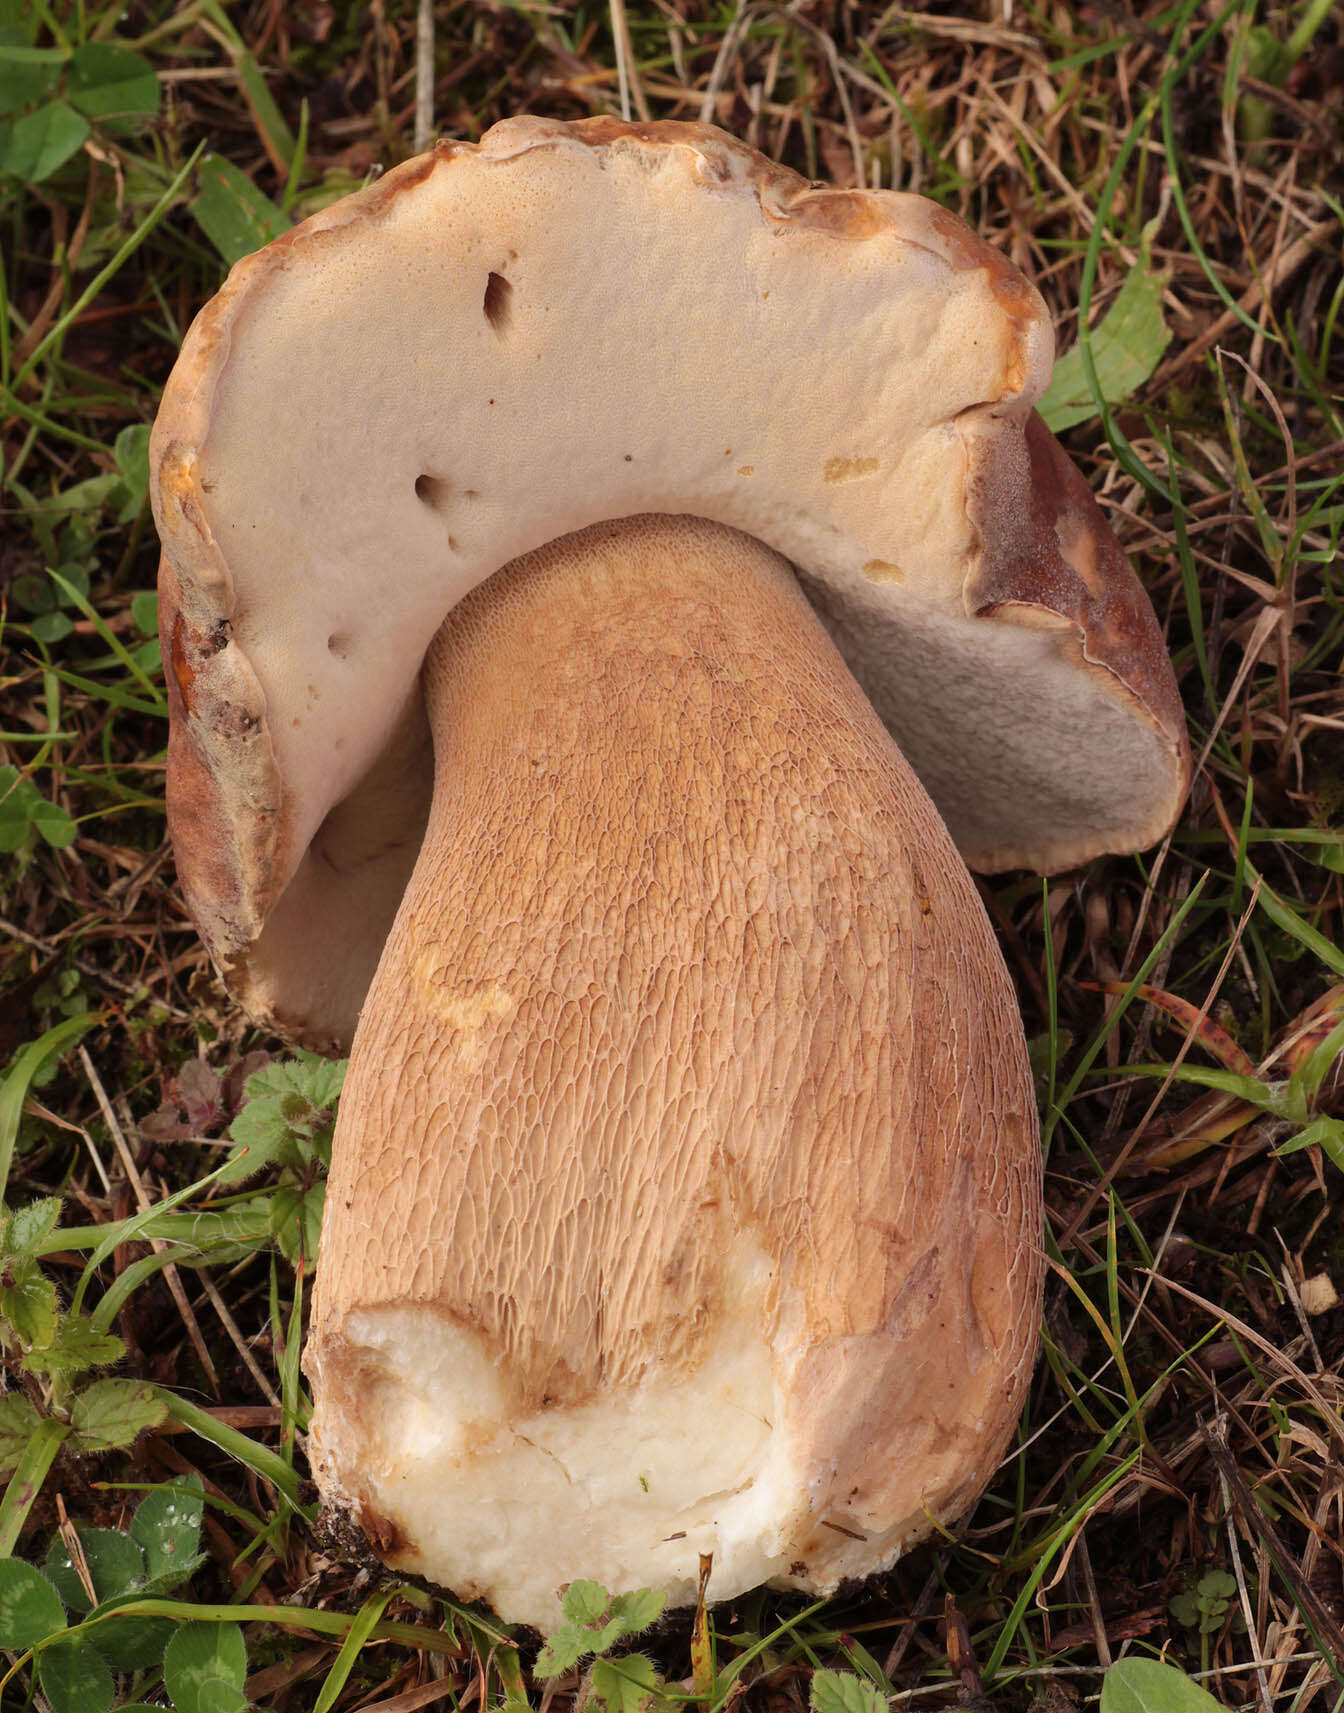 Image of summer cep